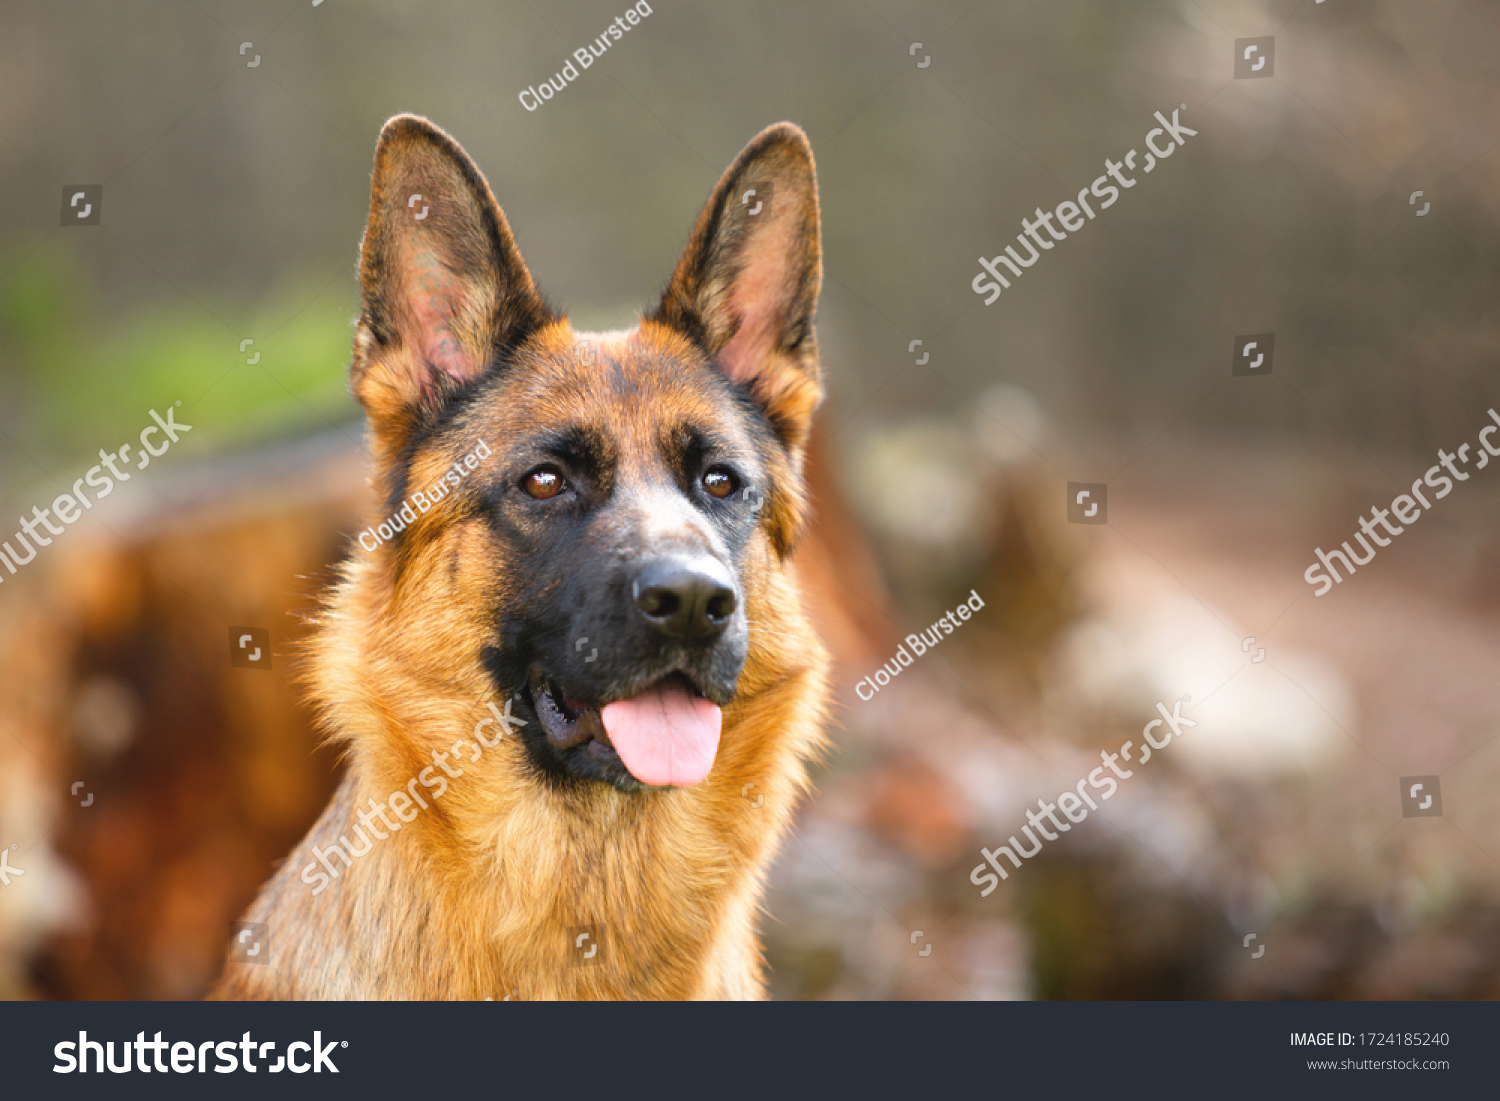 
Portrait of a German shepherd in a park. Purebred dog. #1724185240